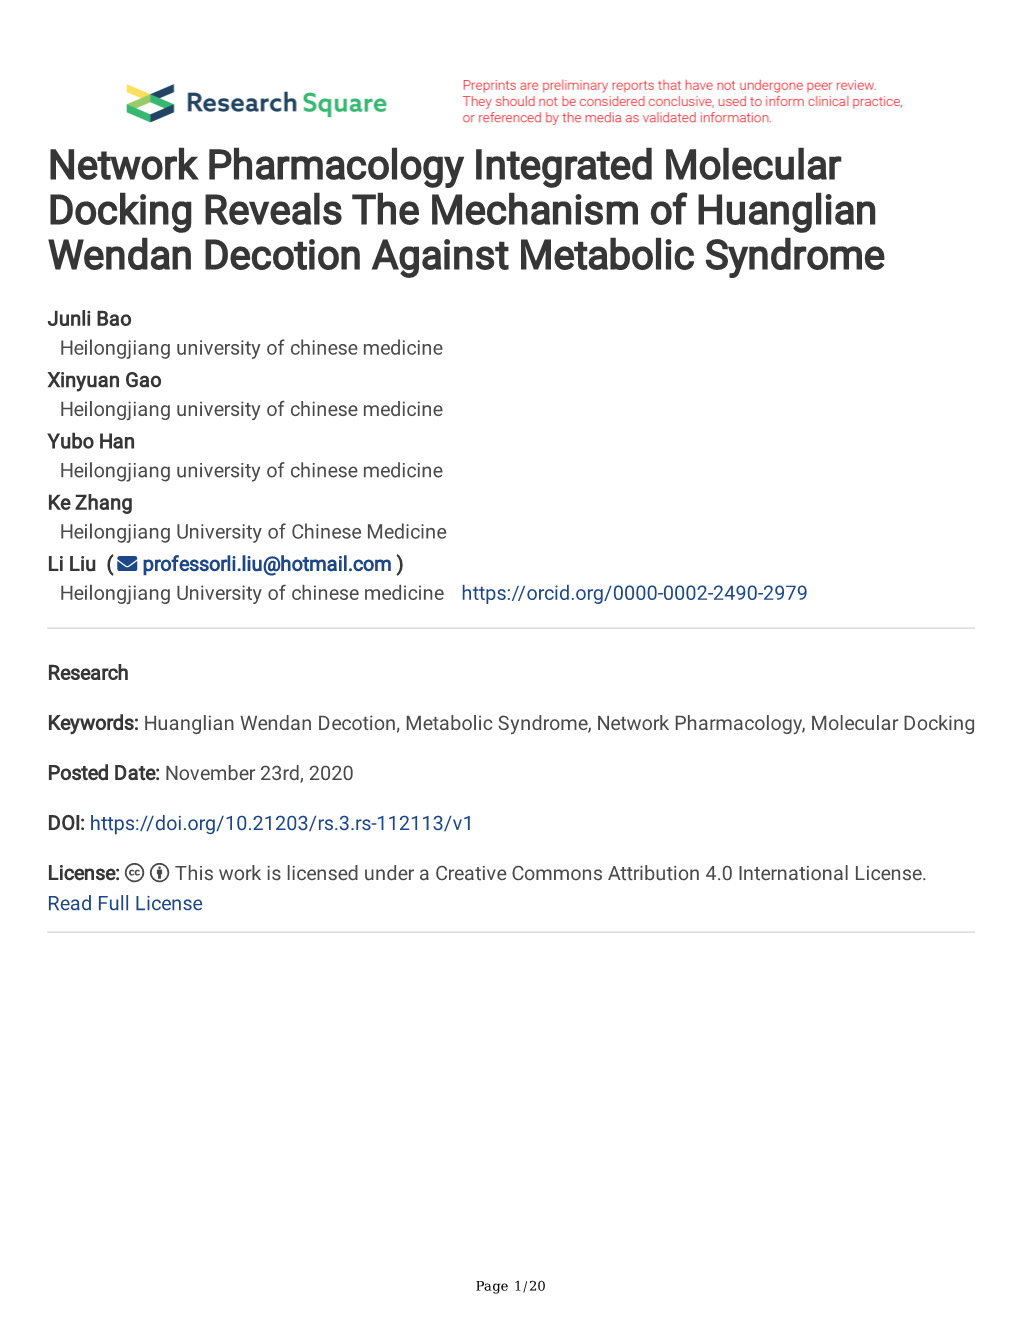 Network Pharmacology Integrated Molecular Docking Reveals the Mechanism of Huanglian Wendan Decotion Against Metabolic Syndrome